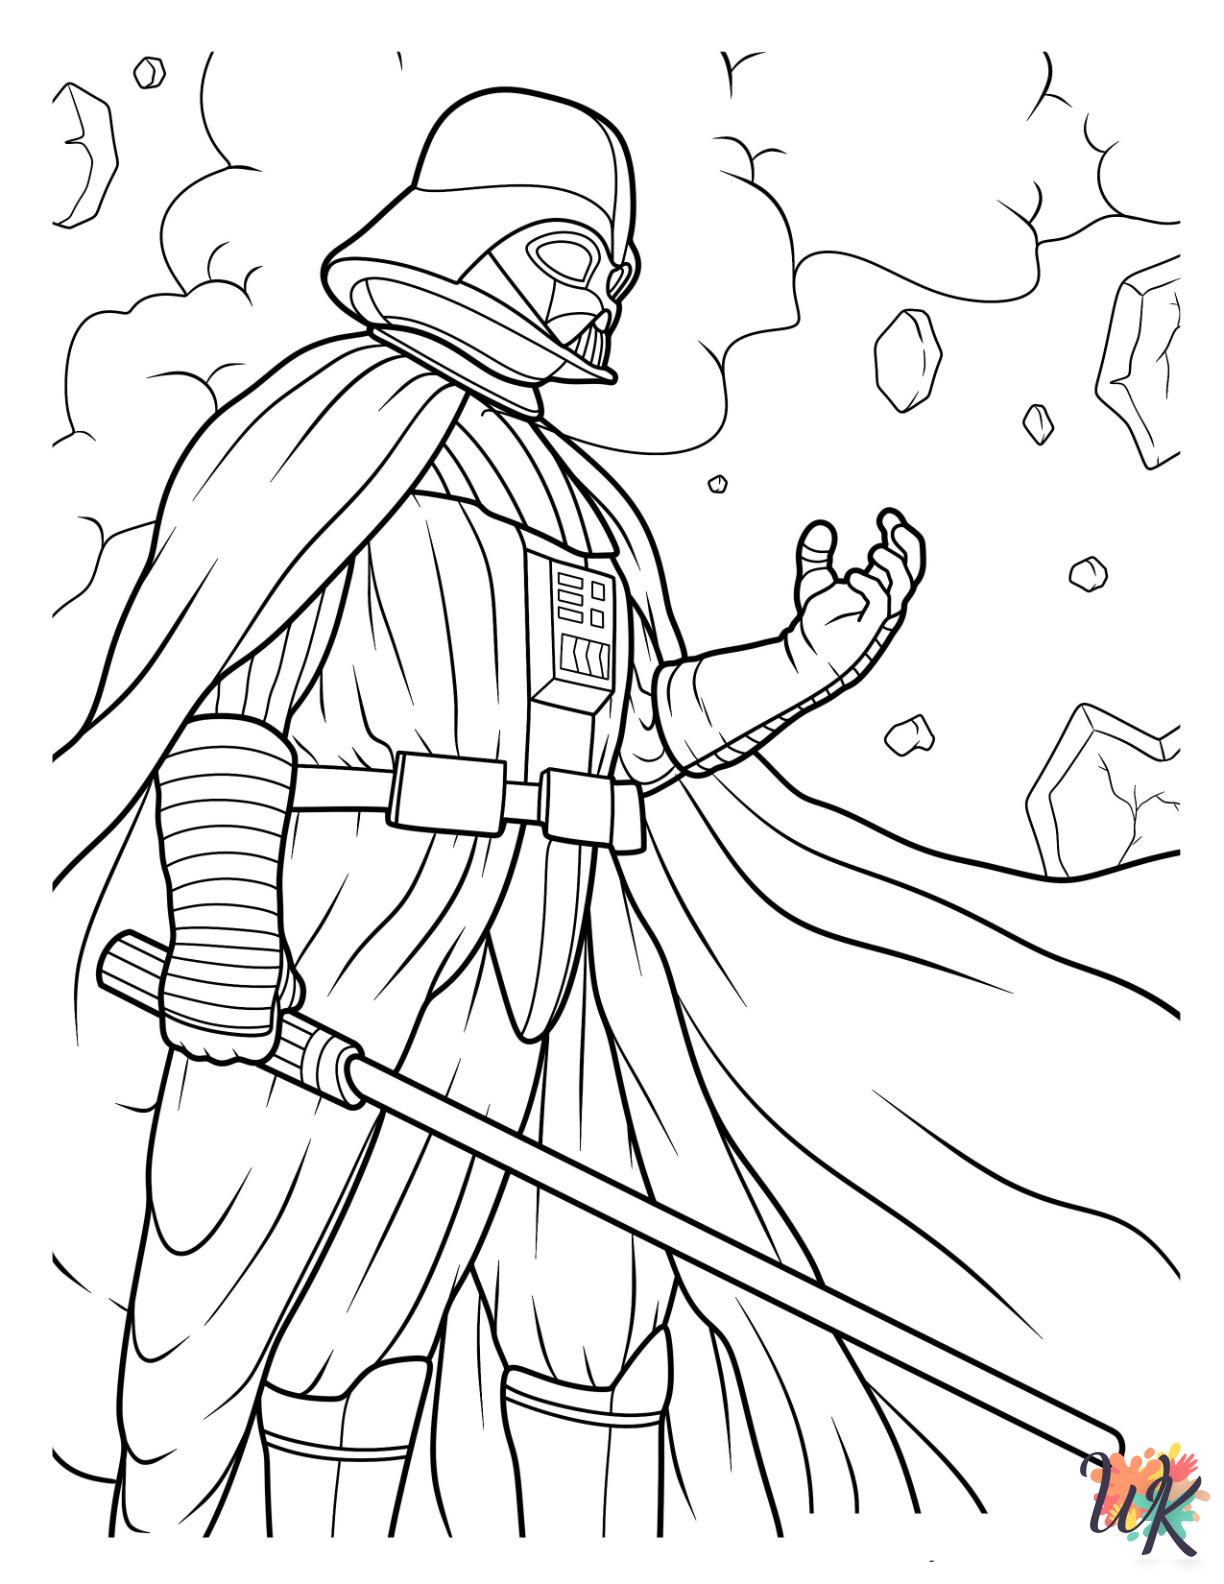 Darth Vader ornament coloring pages